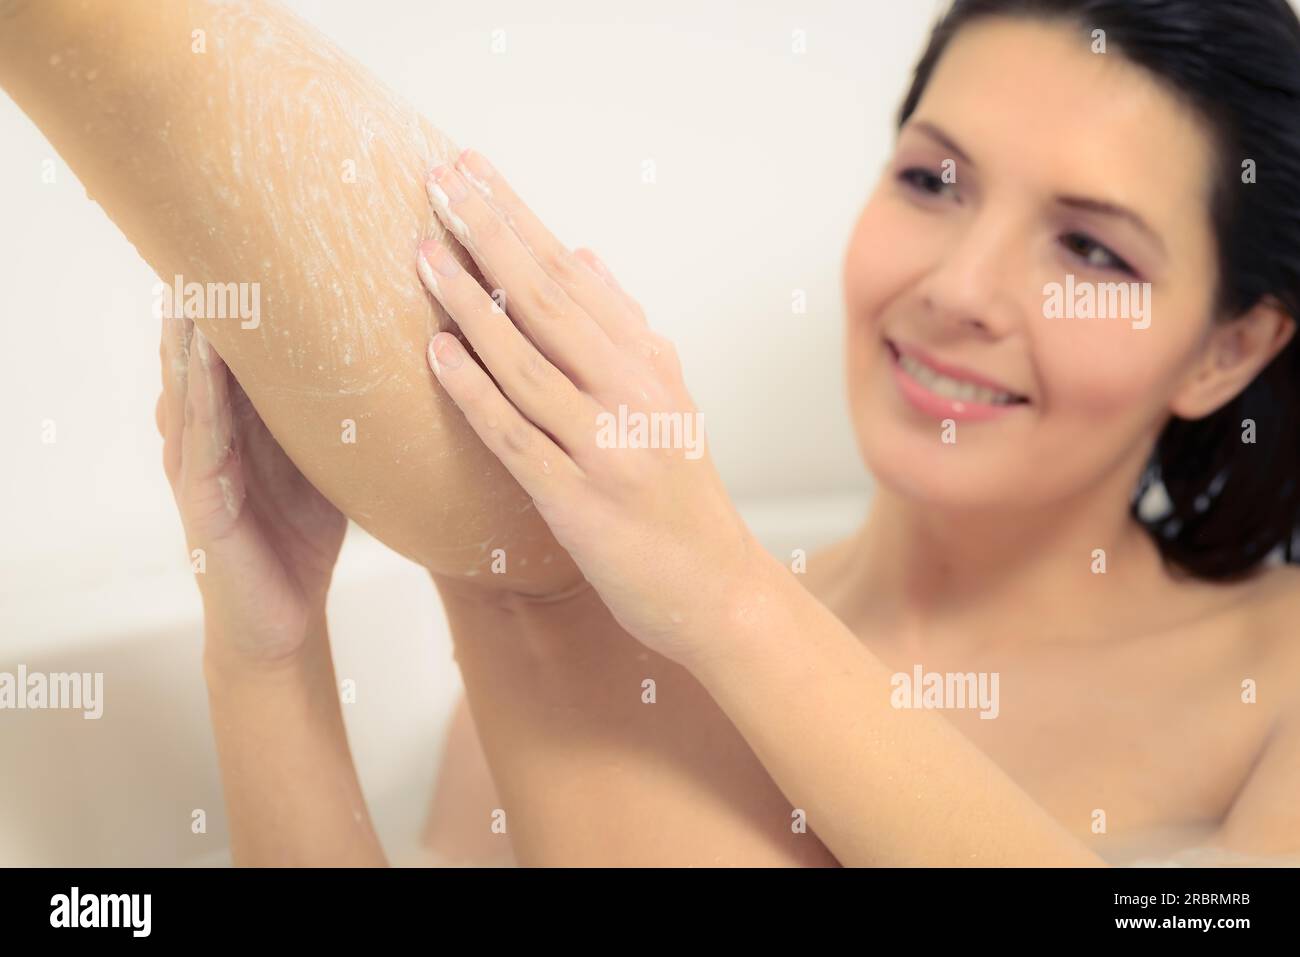 Young woman enjoying a relaxing bath soaping her skin to wash away the dirt from her days activities as she cares for her skin in a personal hygiene Stock Photo